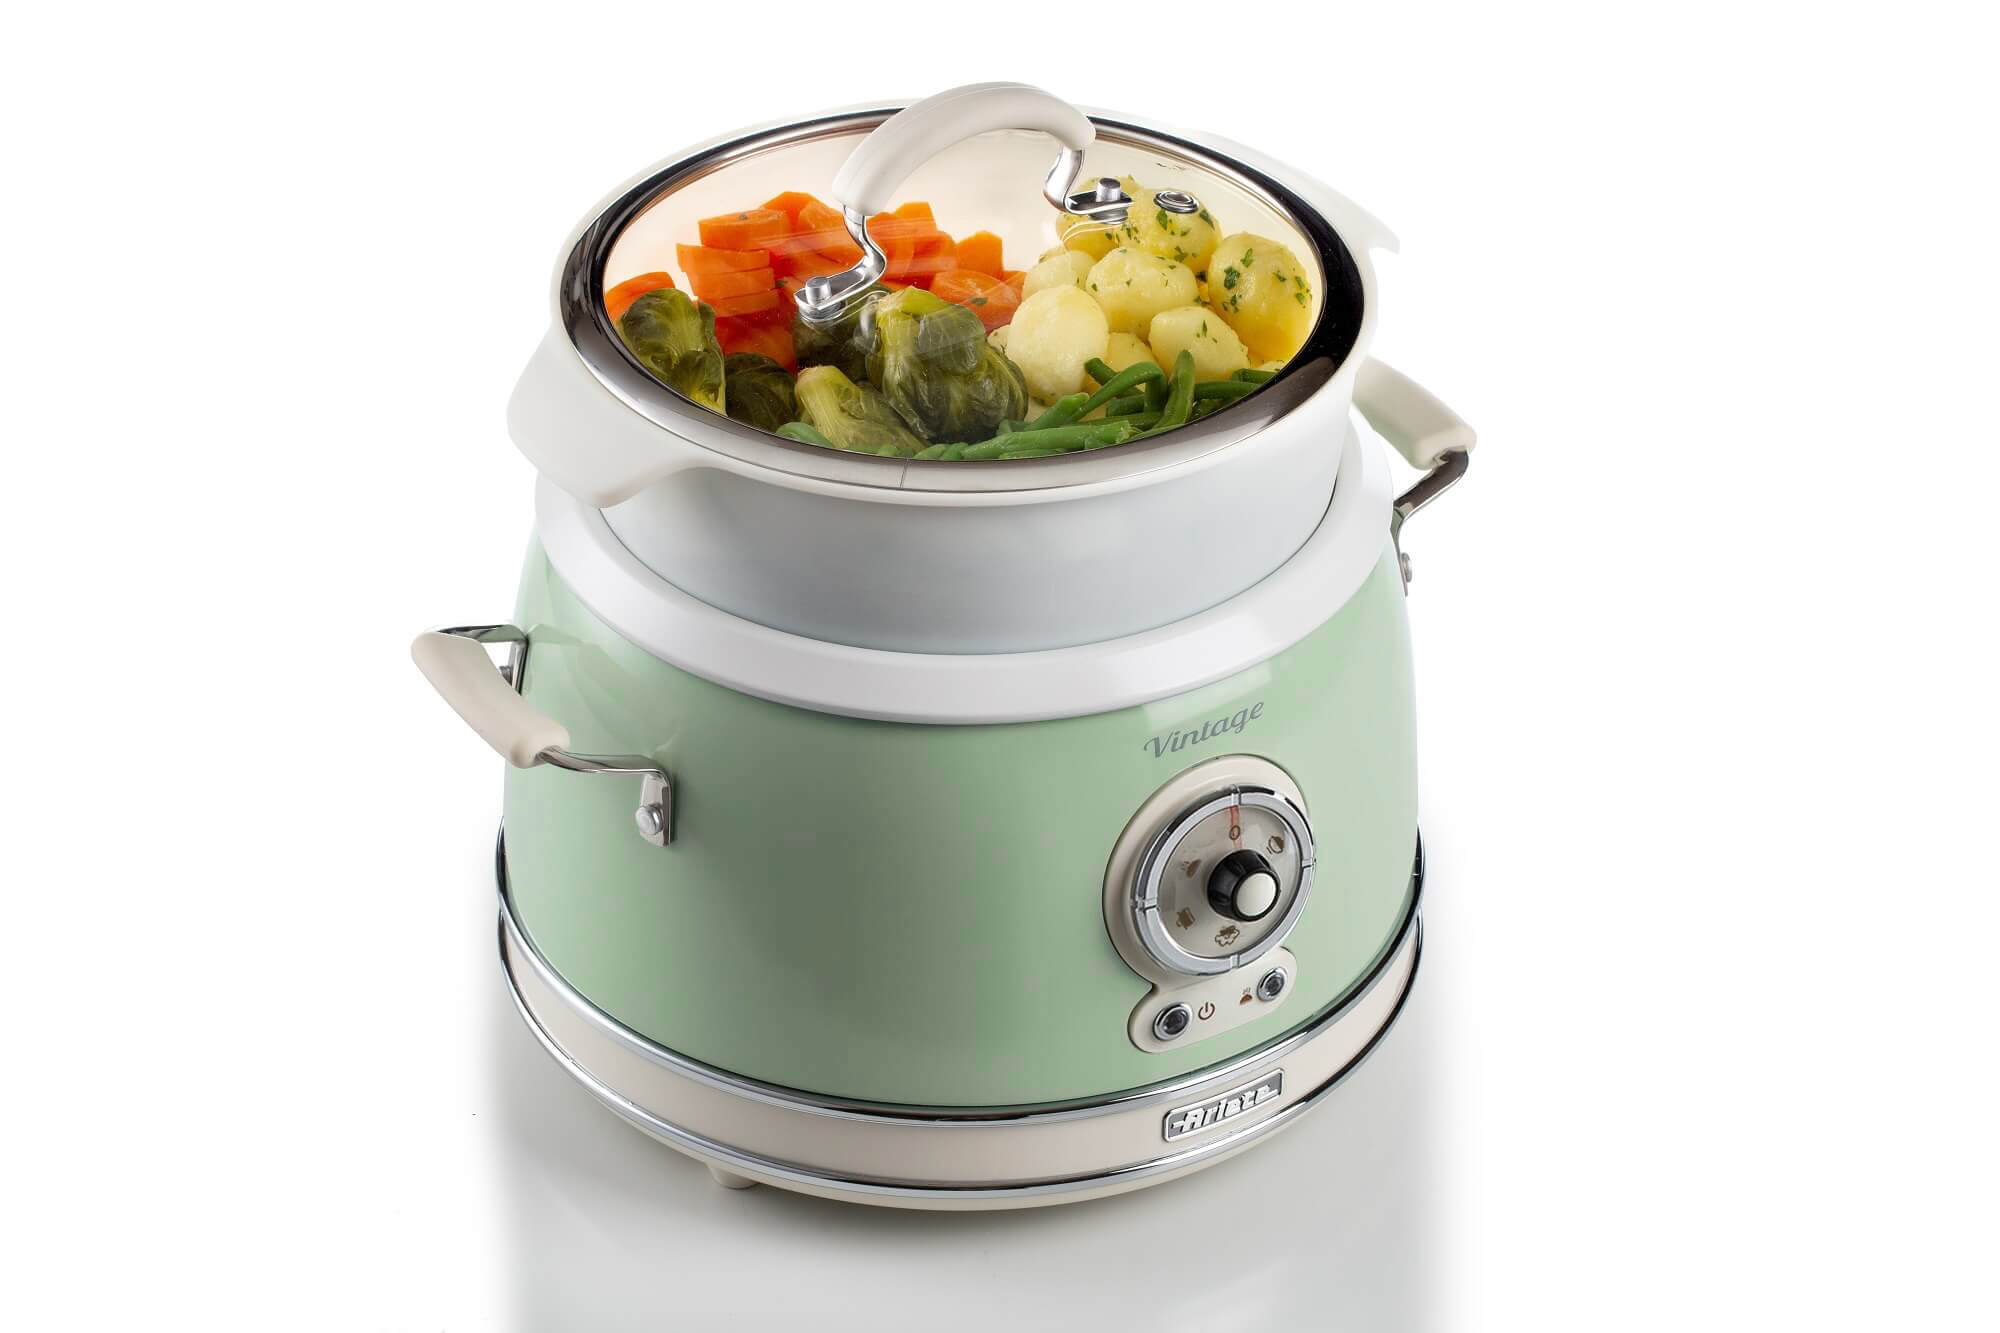 Vintage 10cup Automatic Rice Cooker Retro cool Green - Japan